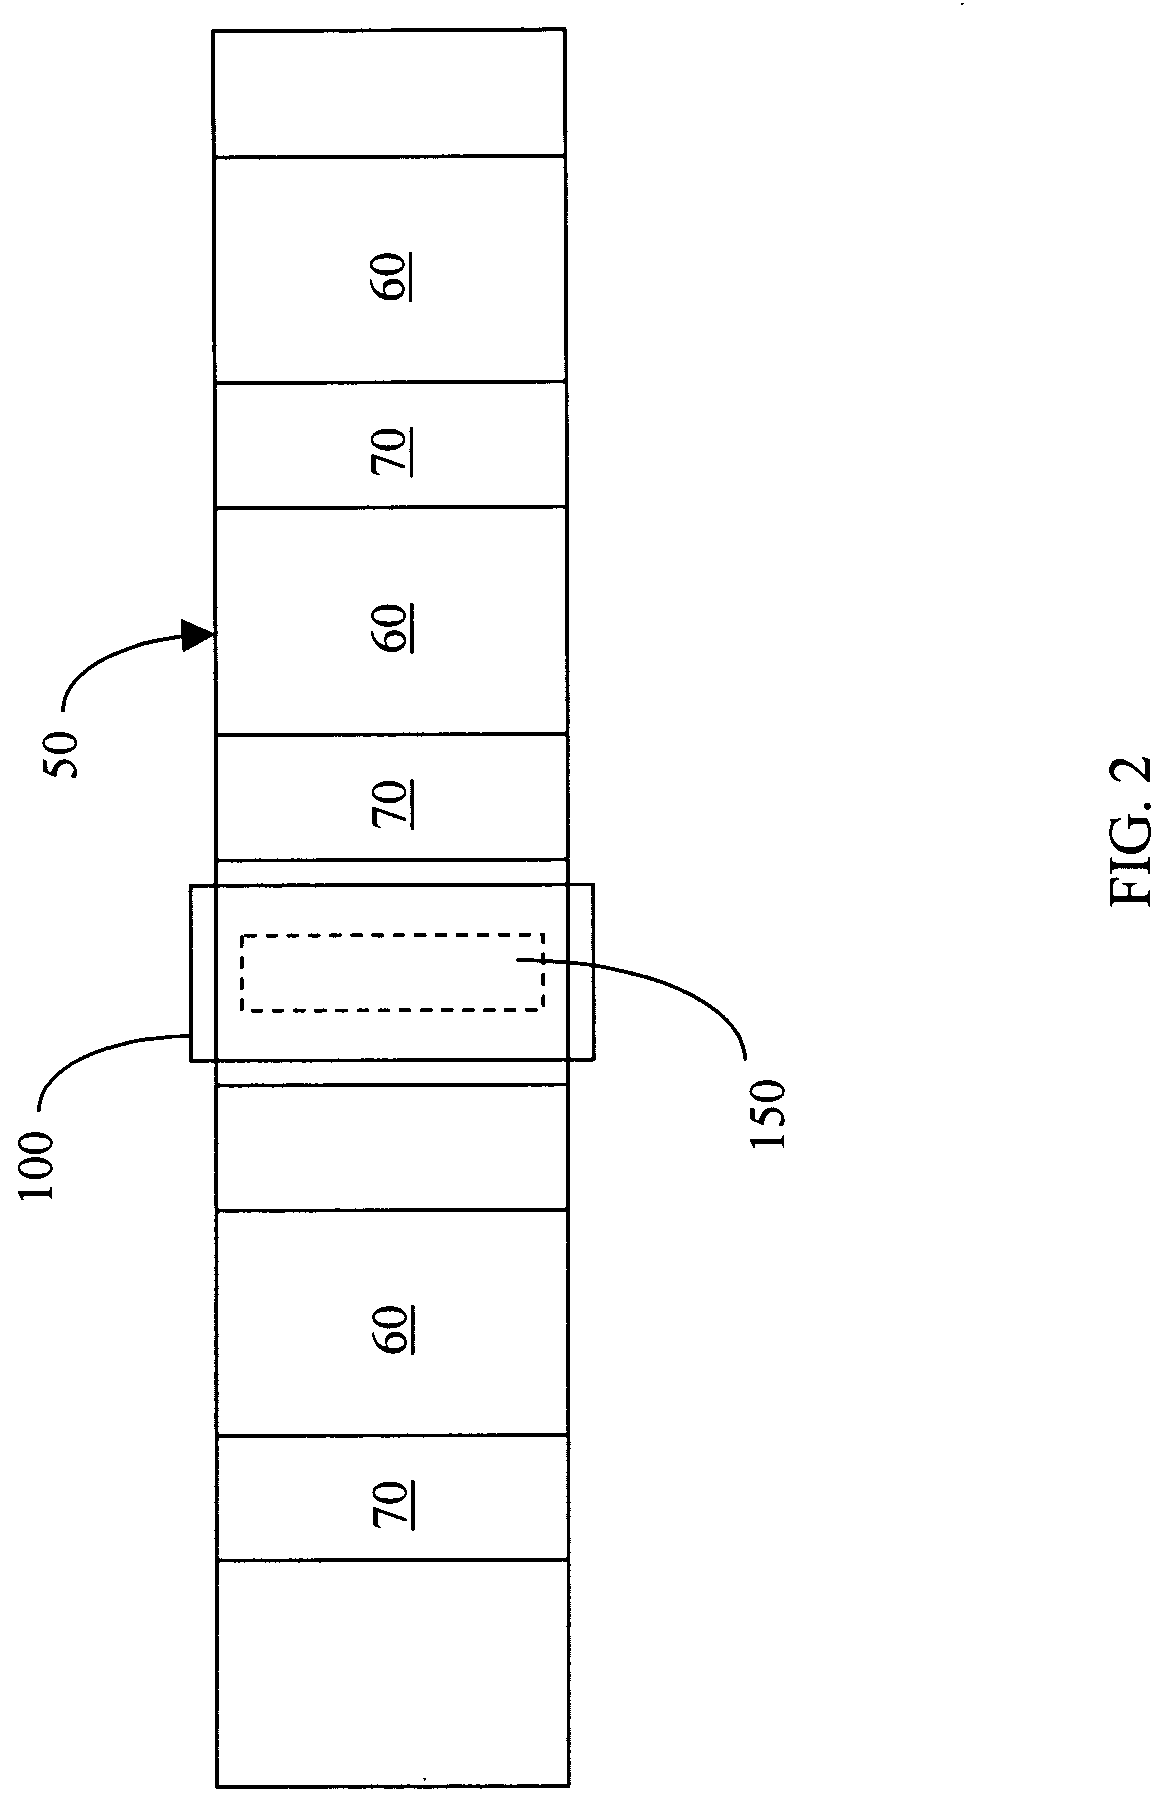 Apparatus for measuring a property of a cigarette paper wrapper and associated method